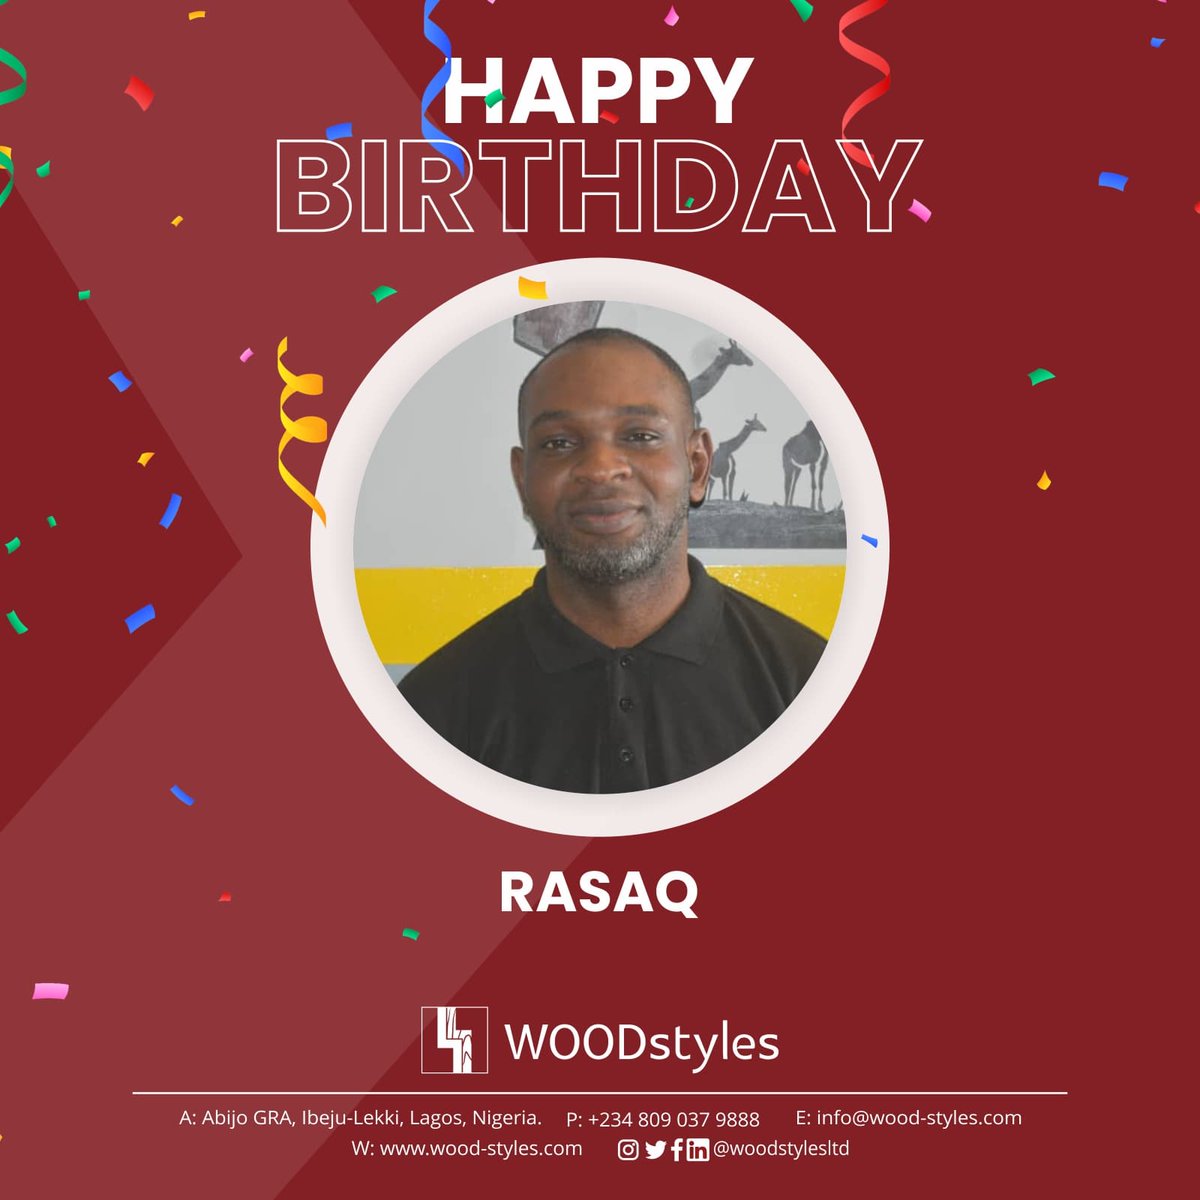 Happy Birthday Rasaq ✨✨

We hope you have an amazing day and year ahead.

From the WOODstyleRS 💓

#WOODstyleRS #woodstyles #woodstylesltd #birthdaywishescometrue #birthdayshout #interiordesign #joinery #interiorinspiration #woodstylesprojects #joinerydesign #fitout